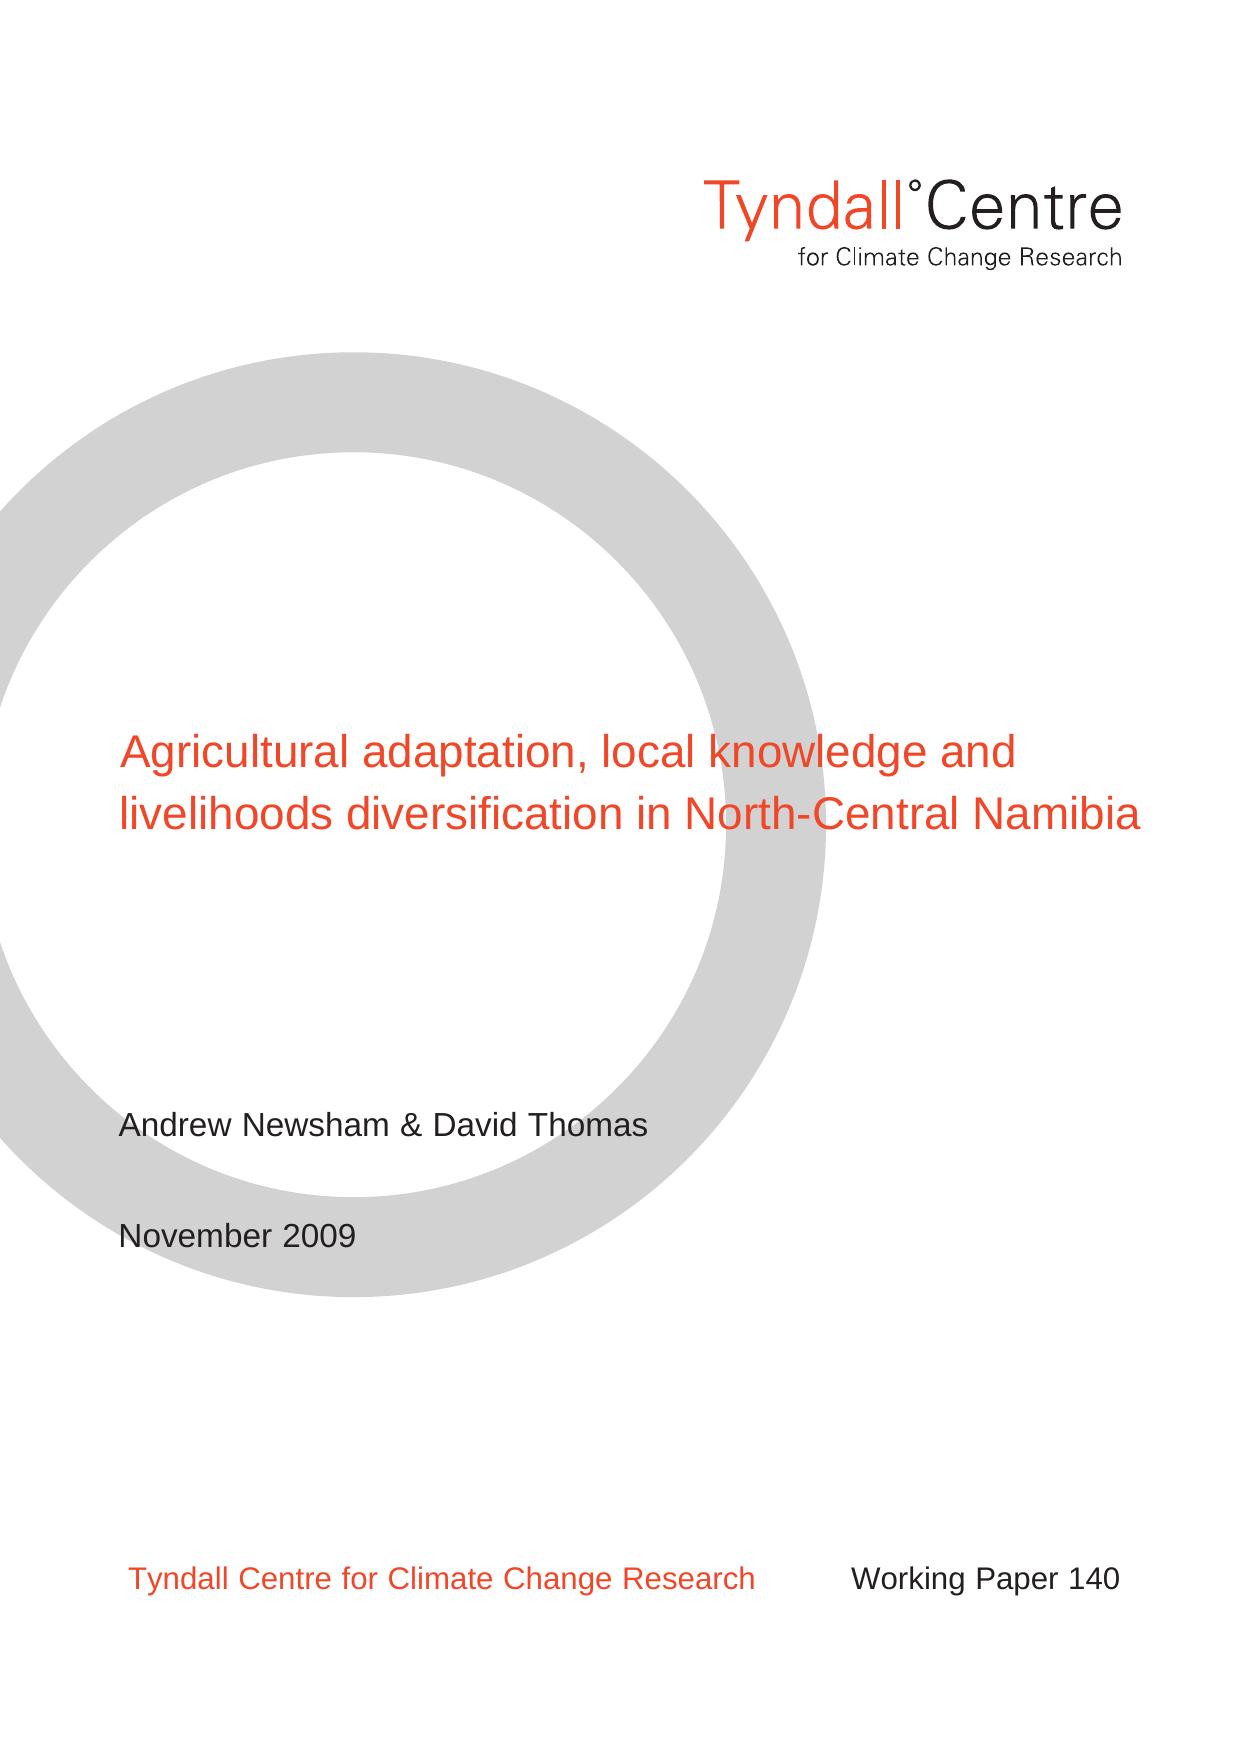 Agricultural adaptation, local knowledge and livelihoods diversification in North-Central Namibia